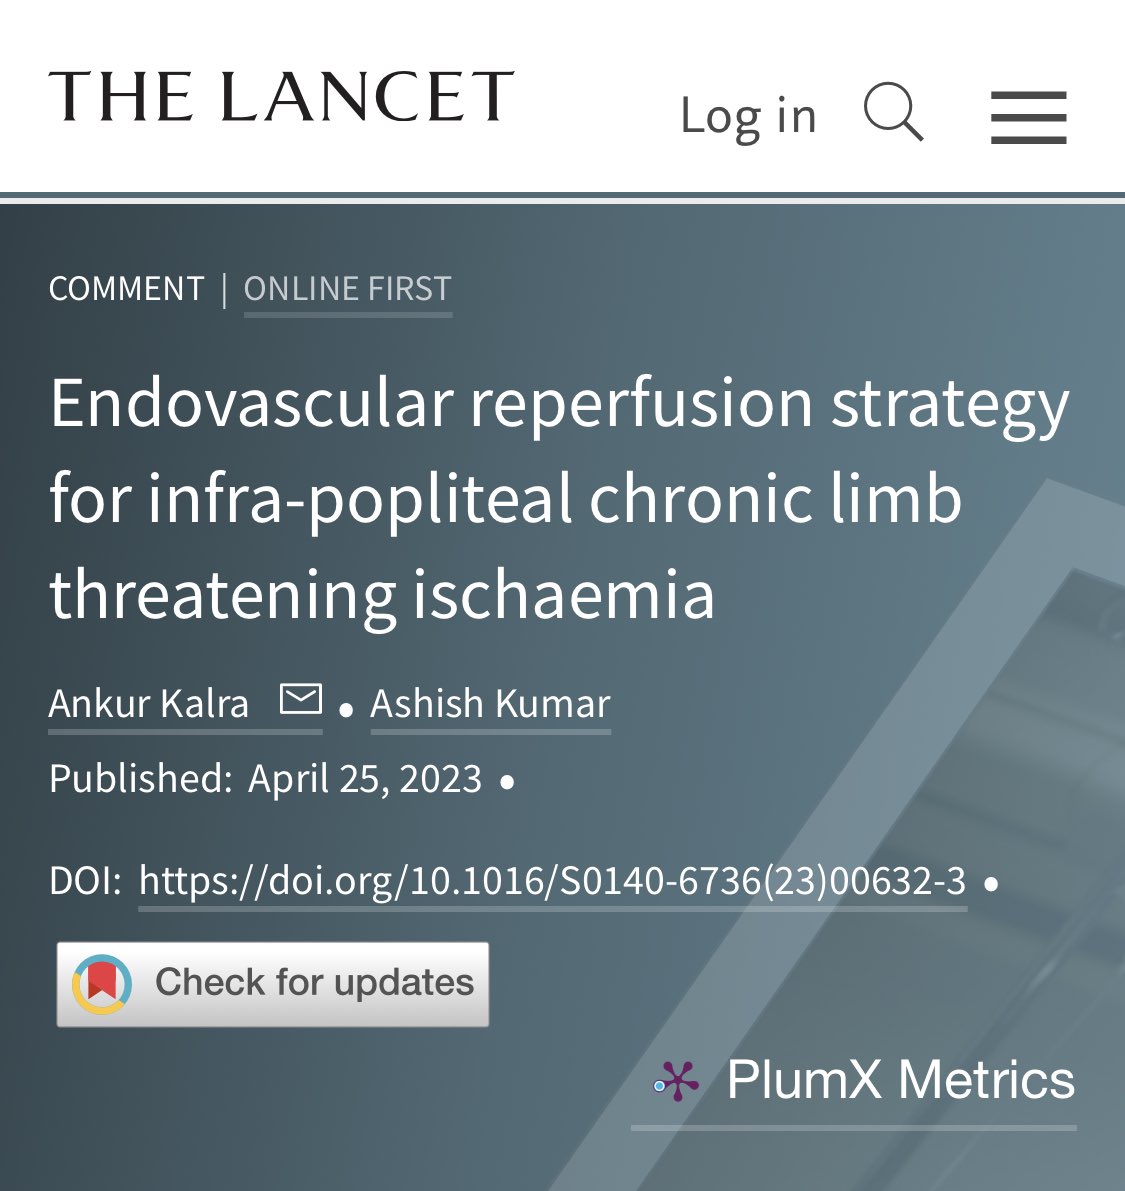 Endovascular reperfusion strategy for infra-popliteal chronic limb threatening ischaemia—invited commentary on BASIL-2 trial, out now in @TheLancet. thelancet.com/journals/lance…